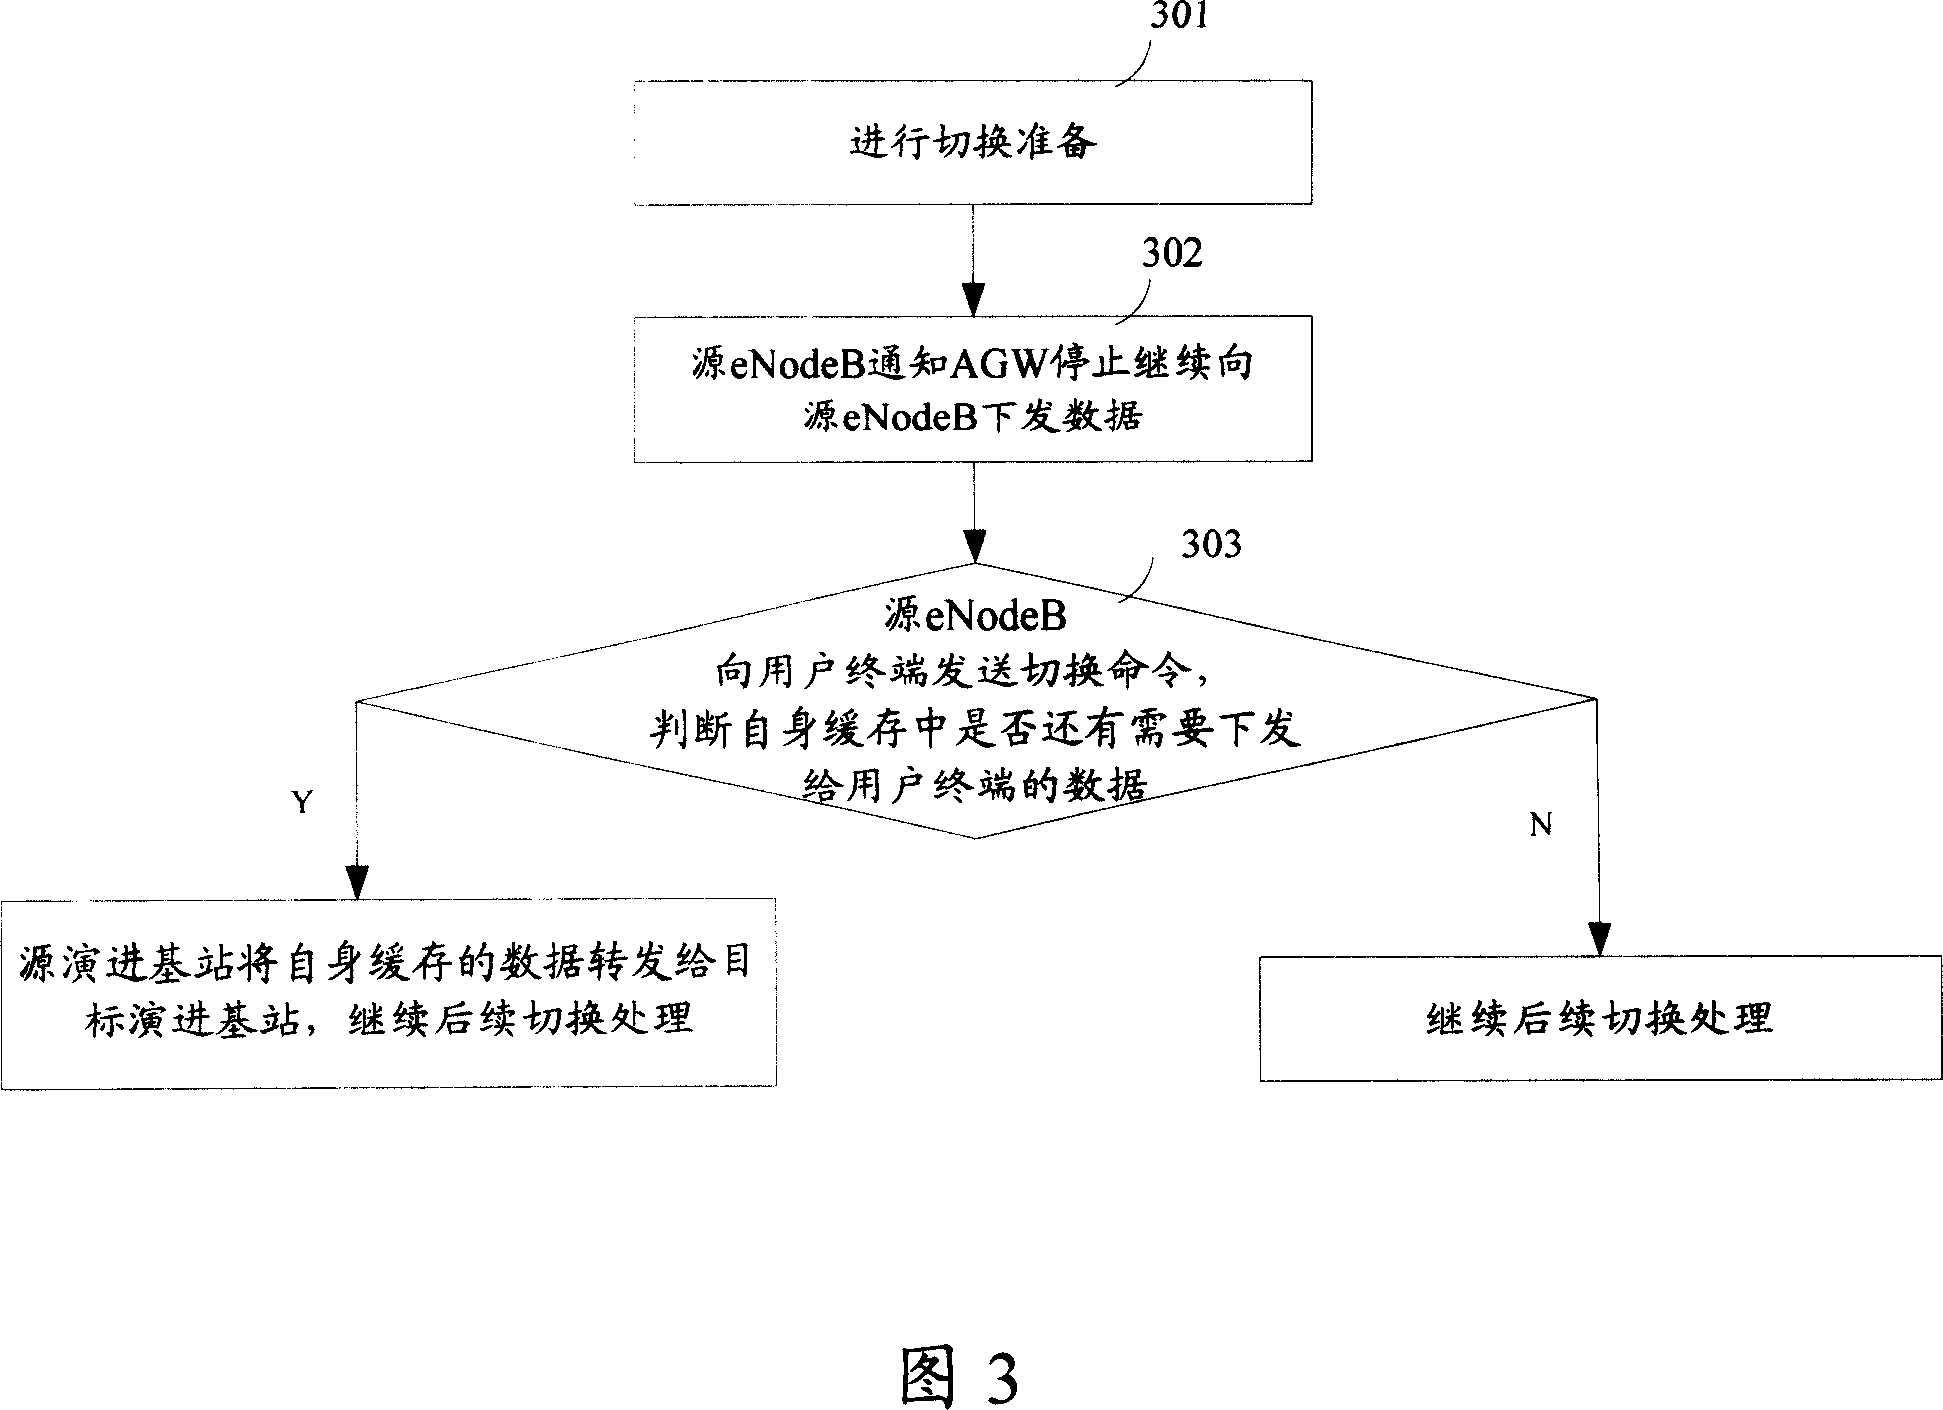 Method for implementing switchover